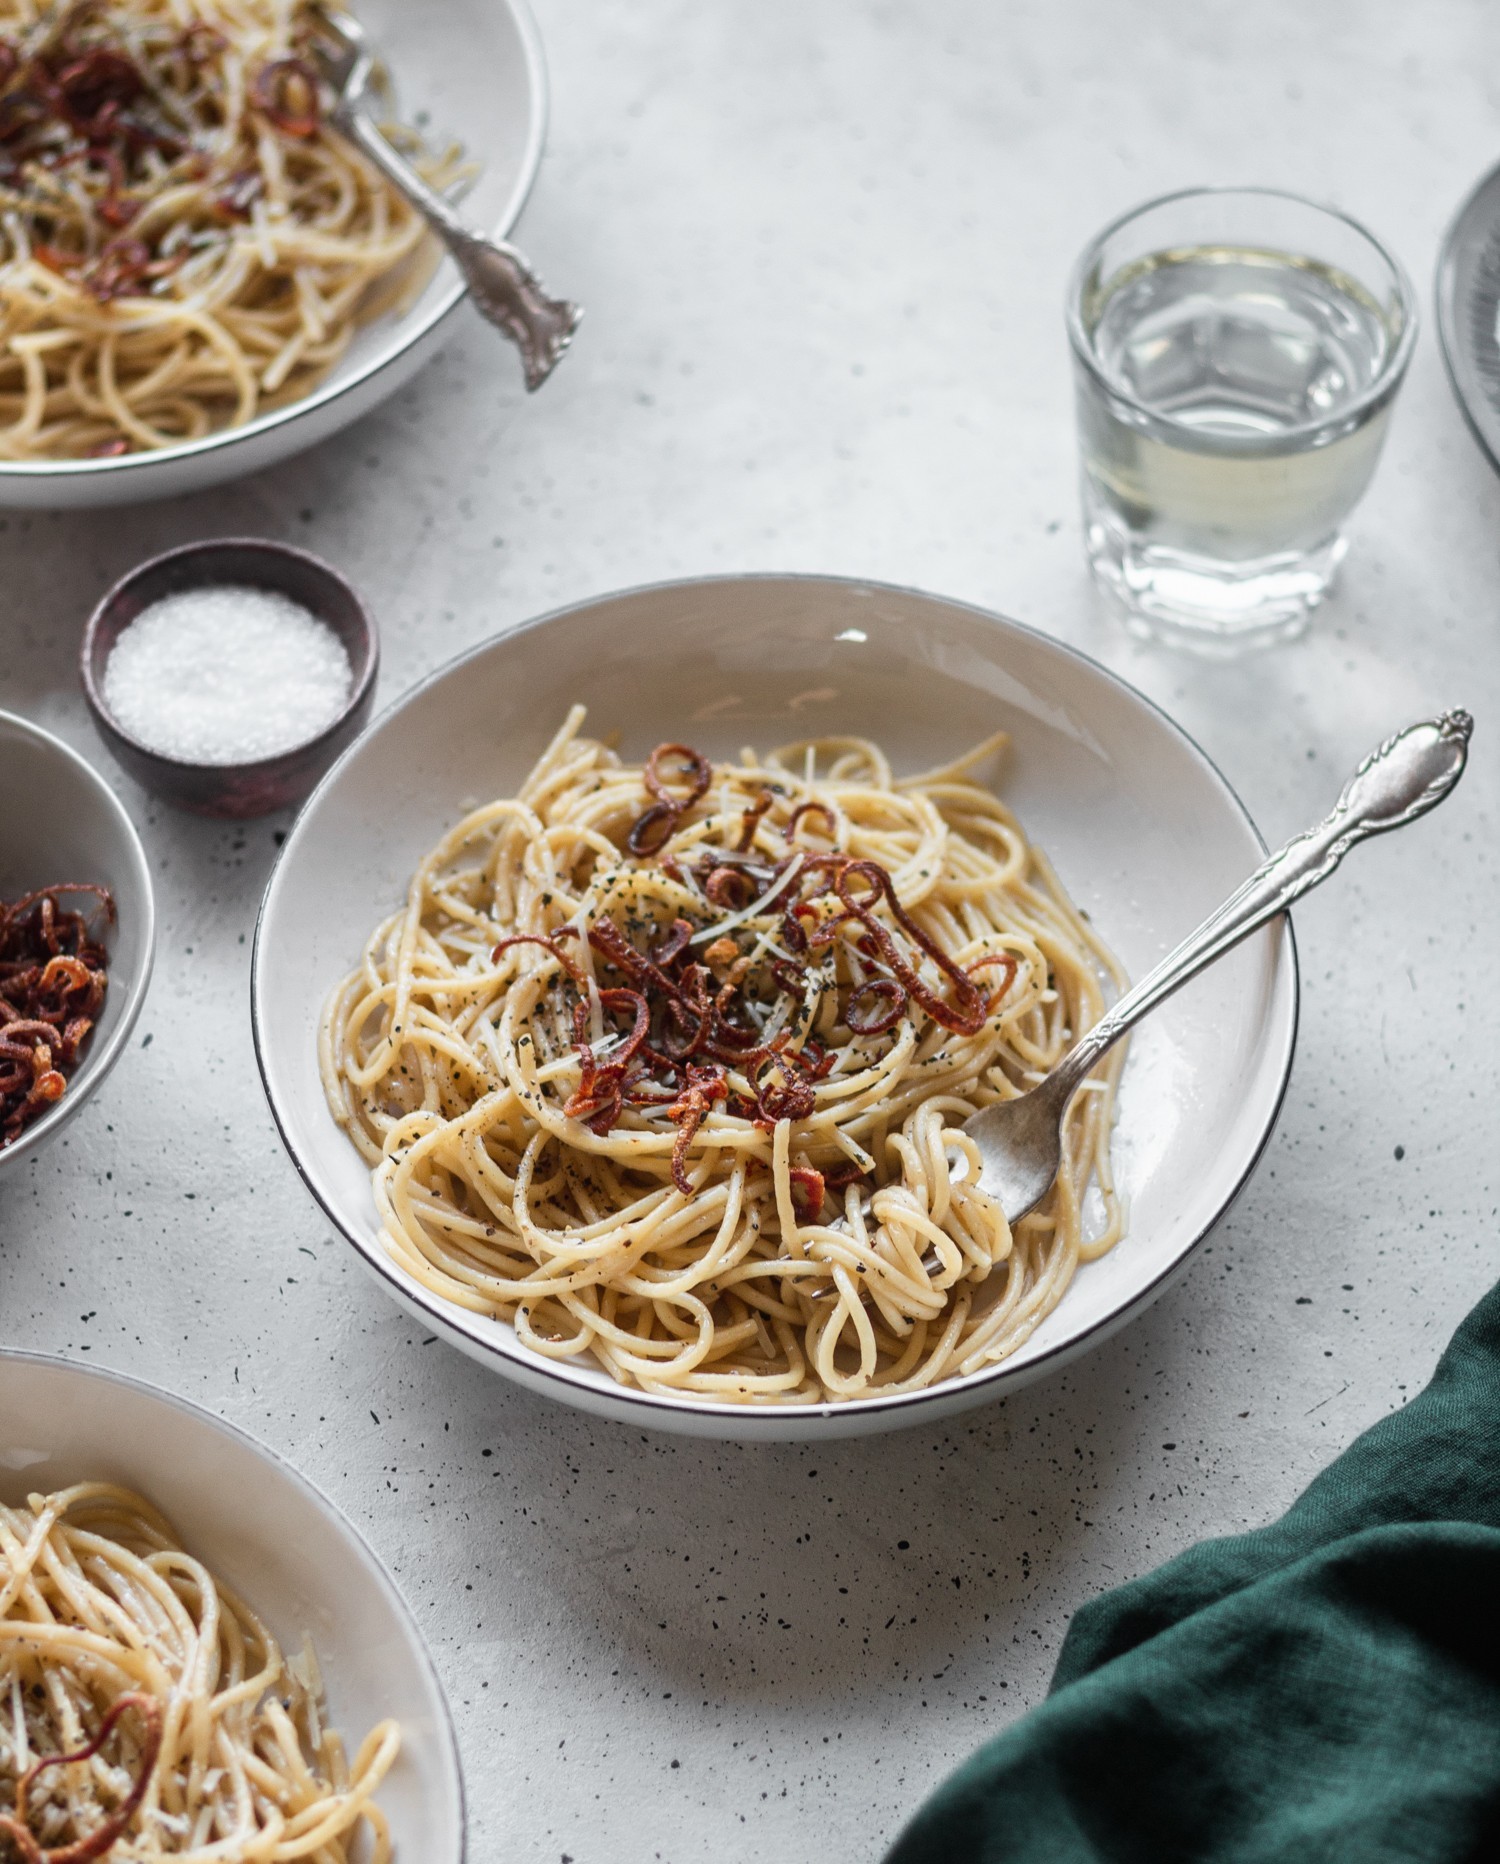 A side shot of a bowl of spaghetti with fried shallots on top, surrounded by a green linen, more bowls of pasta, fried shallots, and a glass of wine on a grey table.